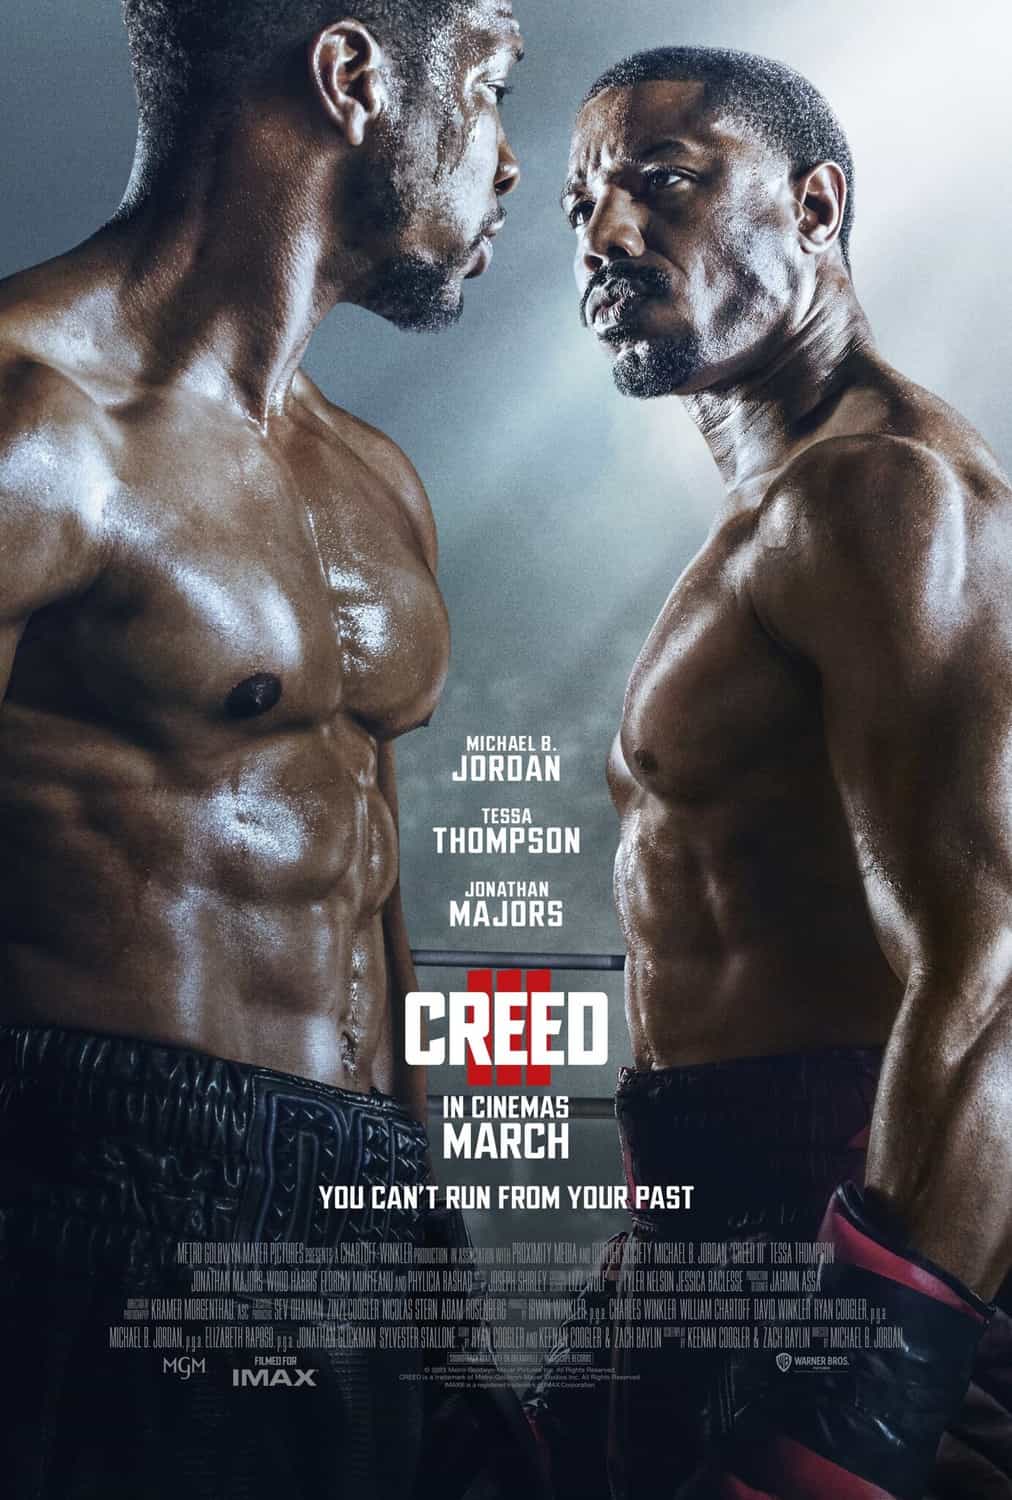 US Box Office Weekend Report 3rd - 5th March 2023:  Creed III tops the US box office on its debut weekend with an opening gross of nearly $60 Million